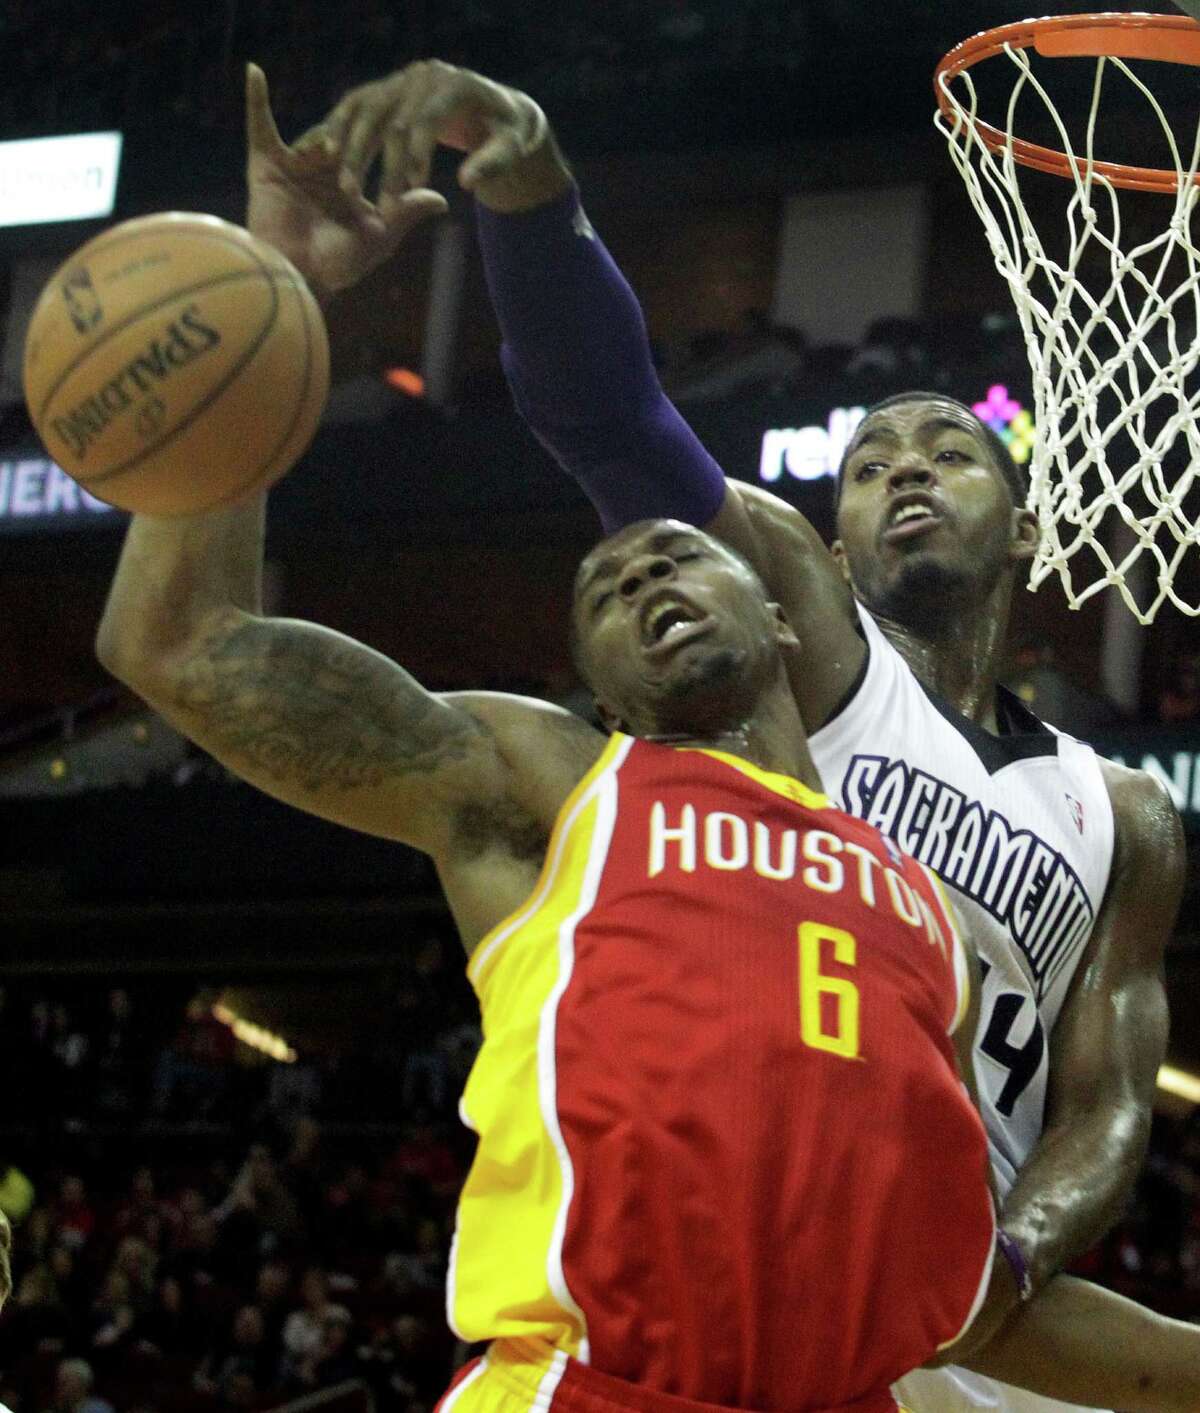 Sacramento's Jason Thompson comes over the top of the Rockets' Terrence Jones (6) to swat the ball away in the first half of the Kings' win Tuesday night.